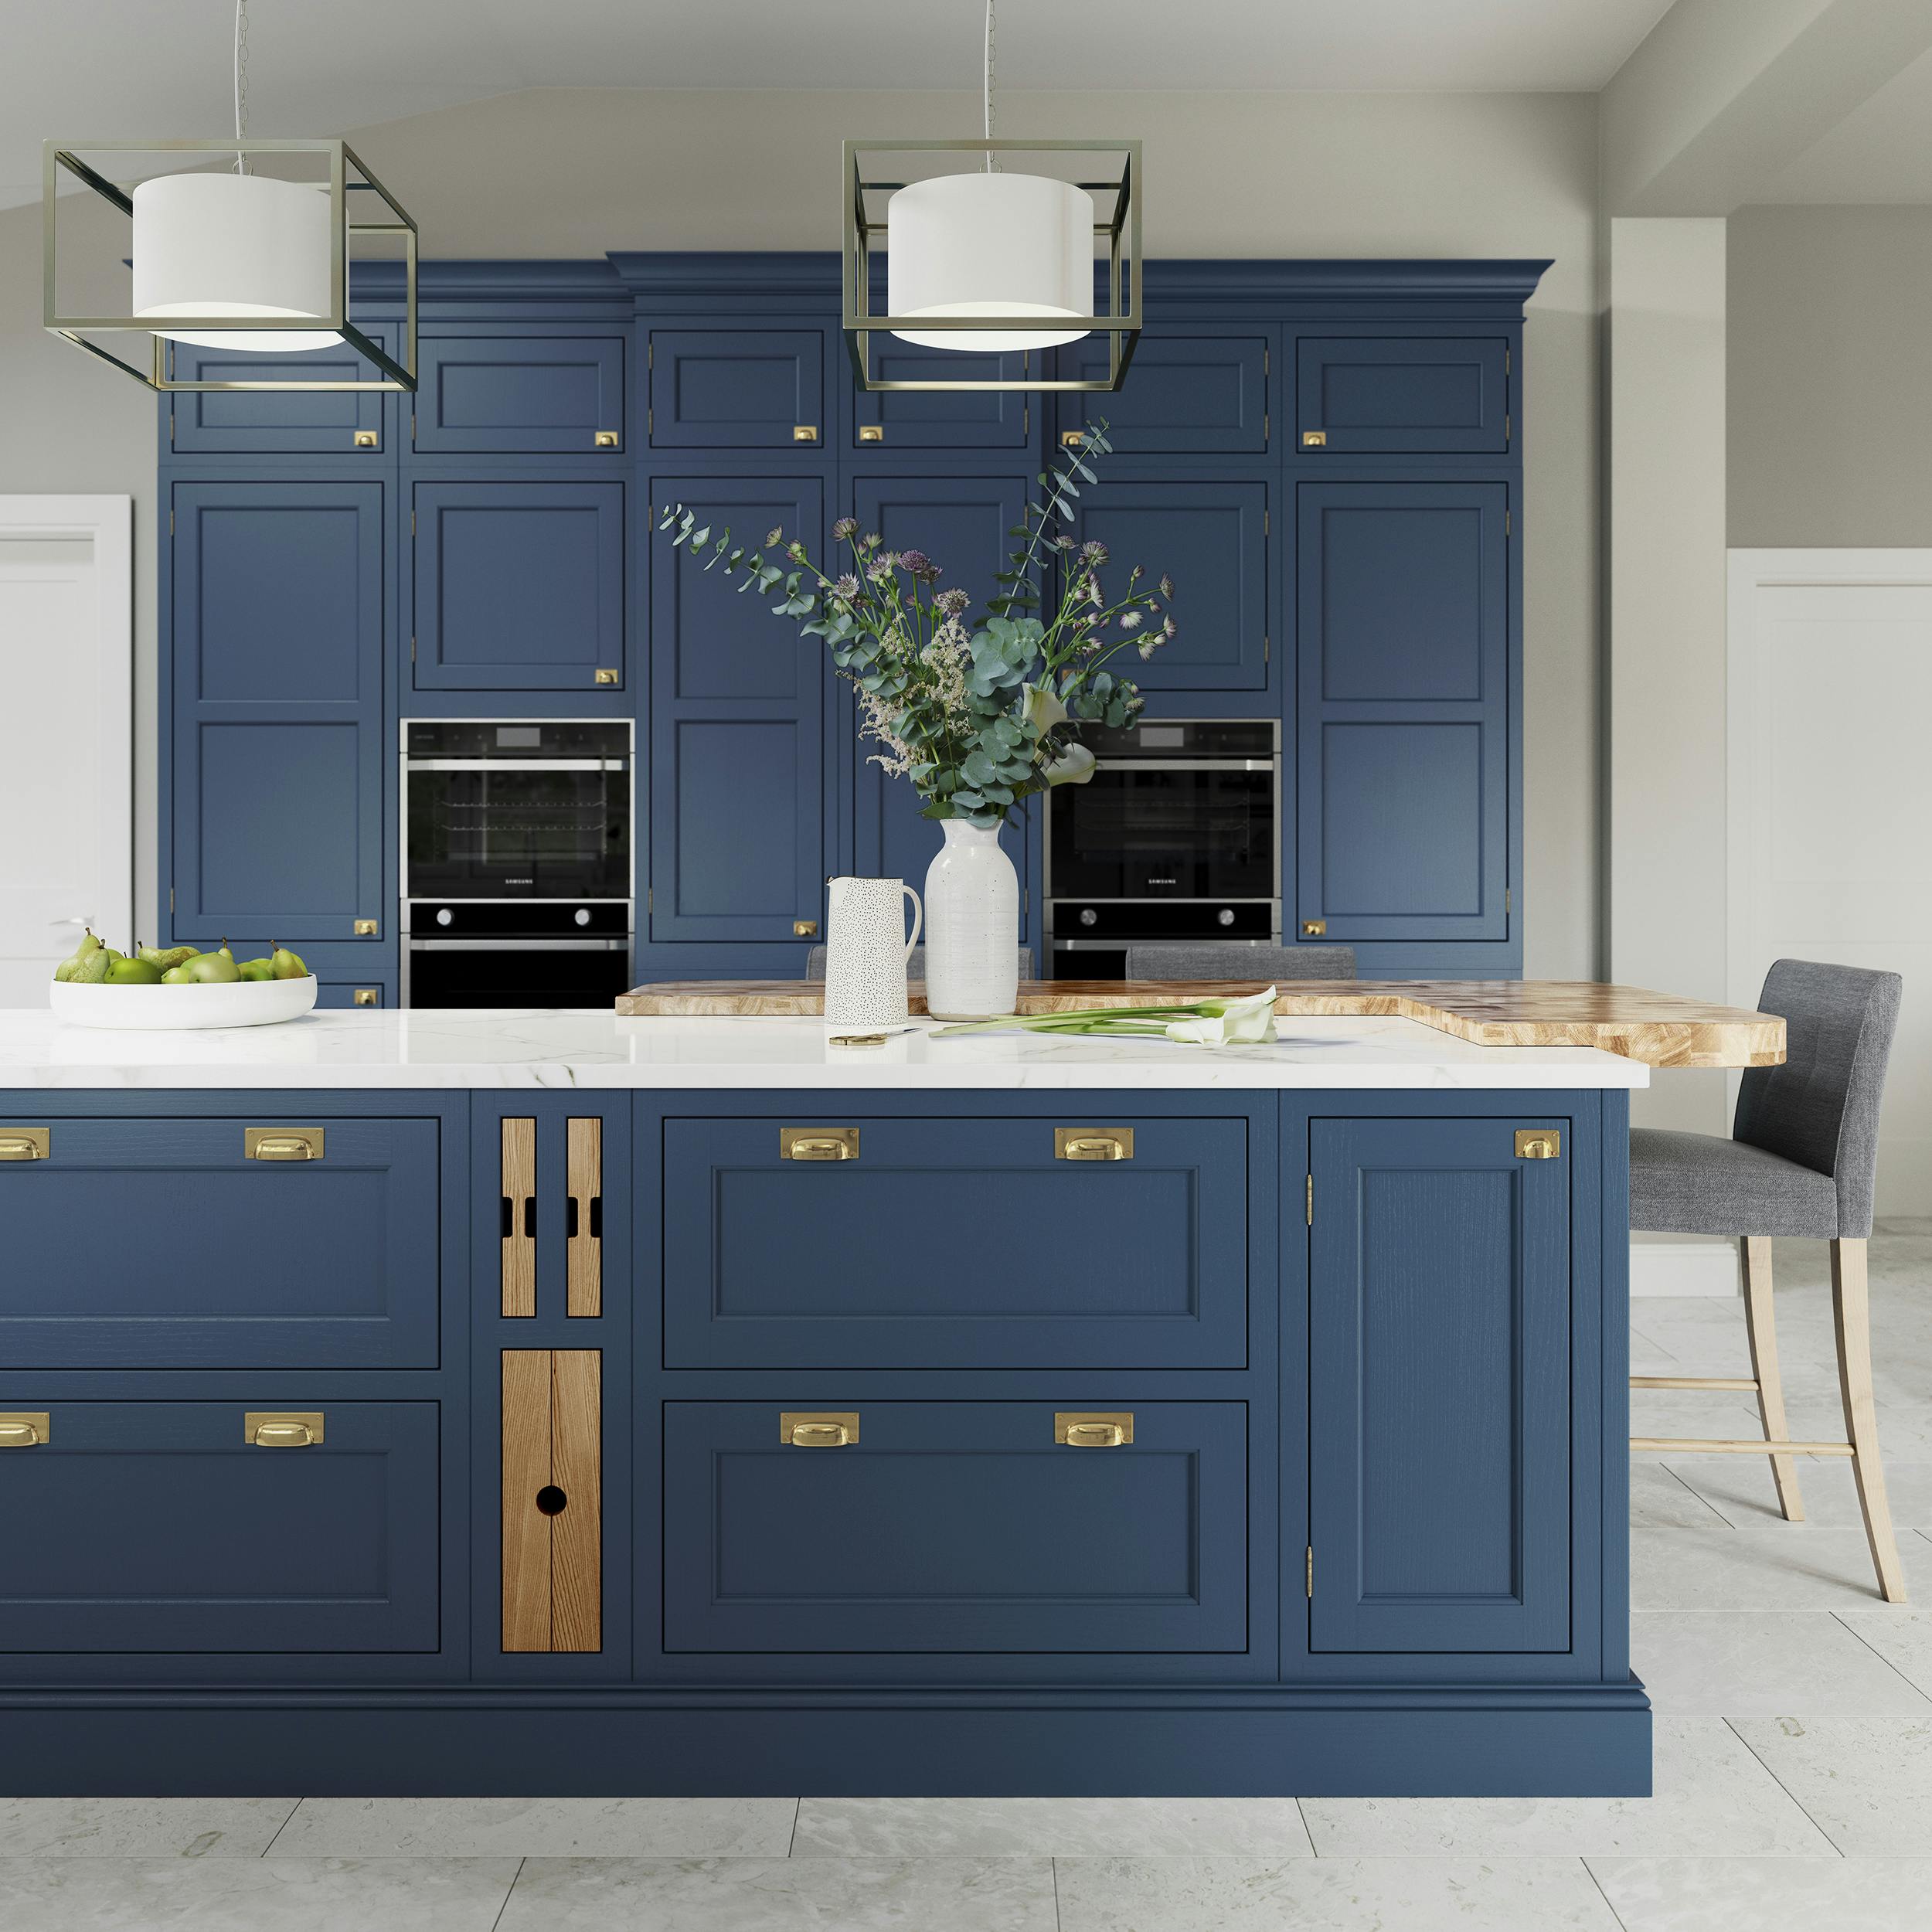 Kitchen Cabinets: What are the differences?